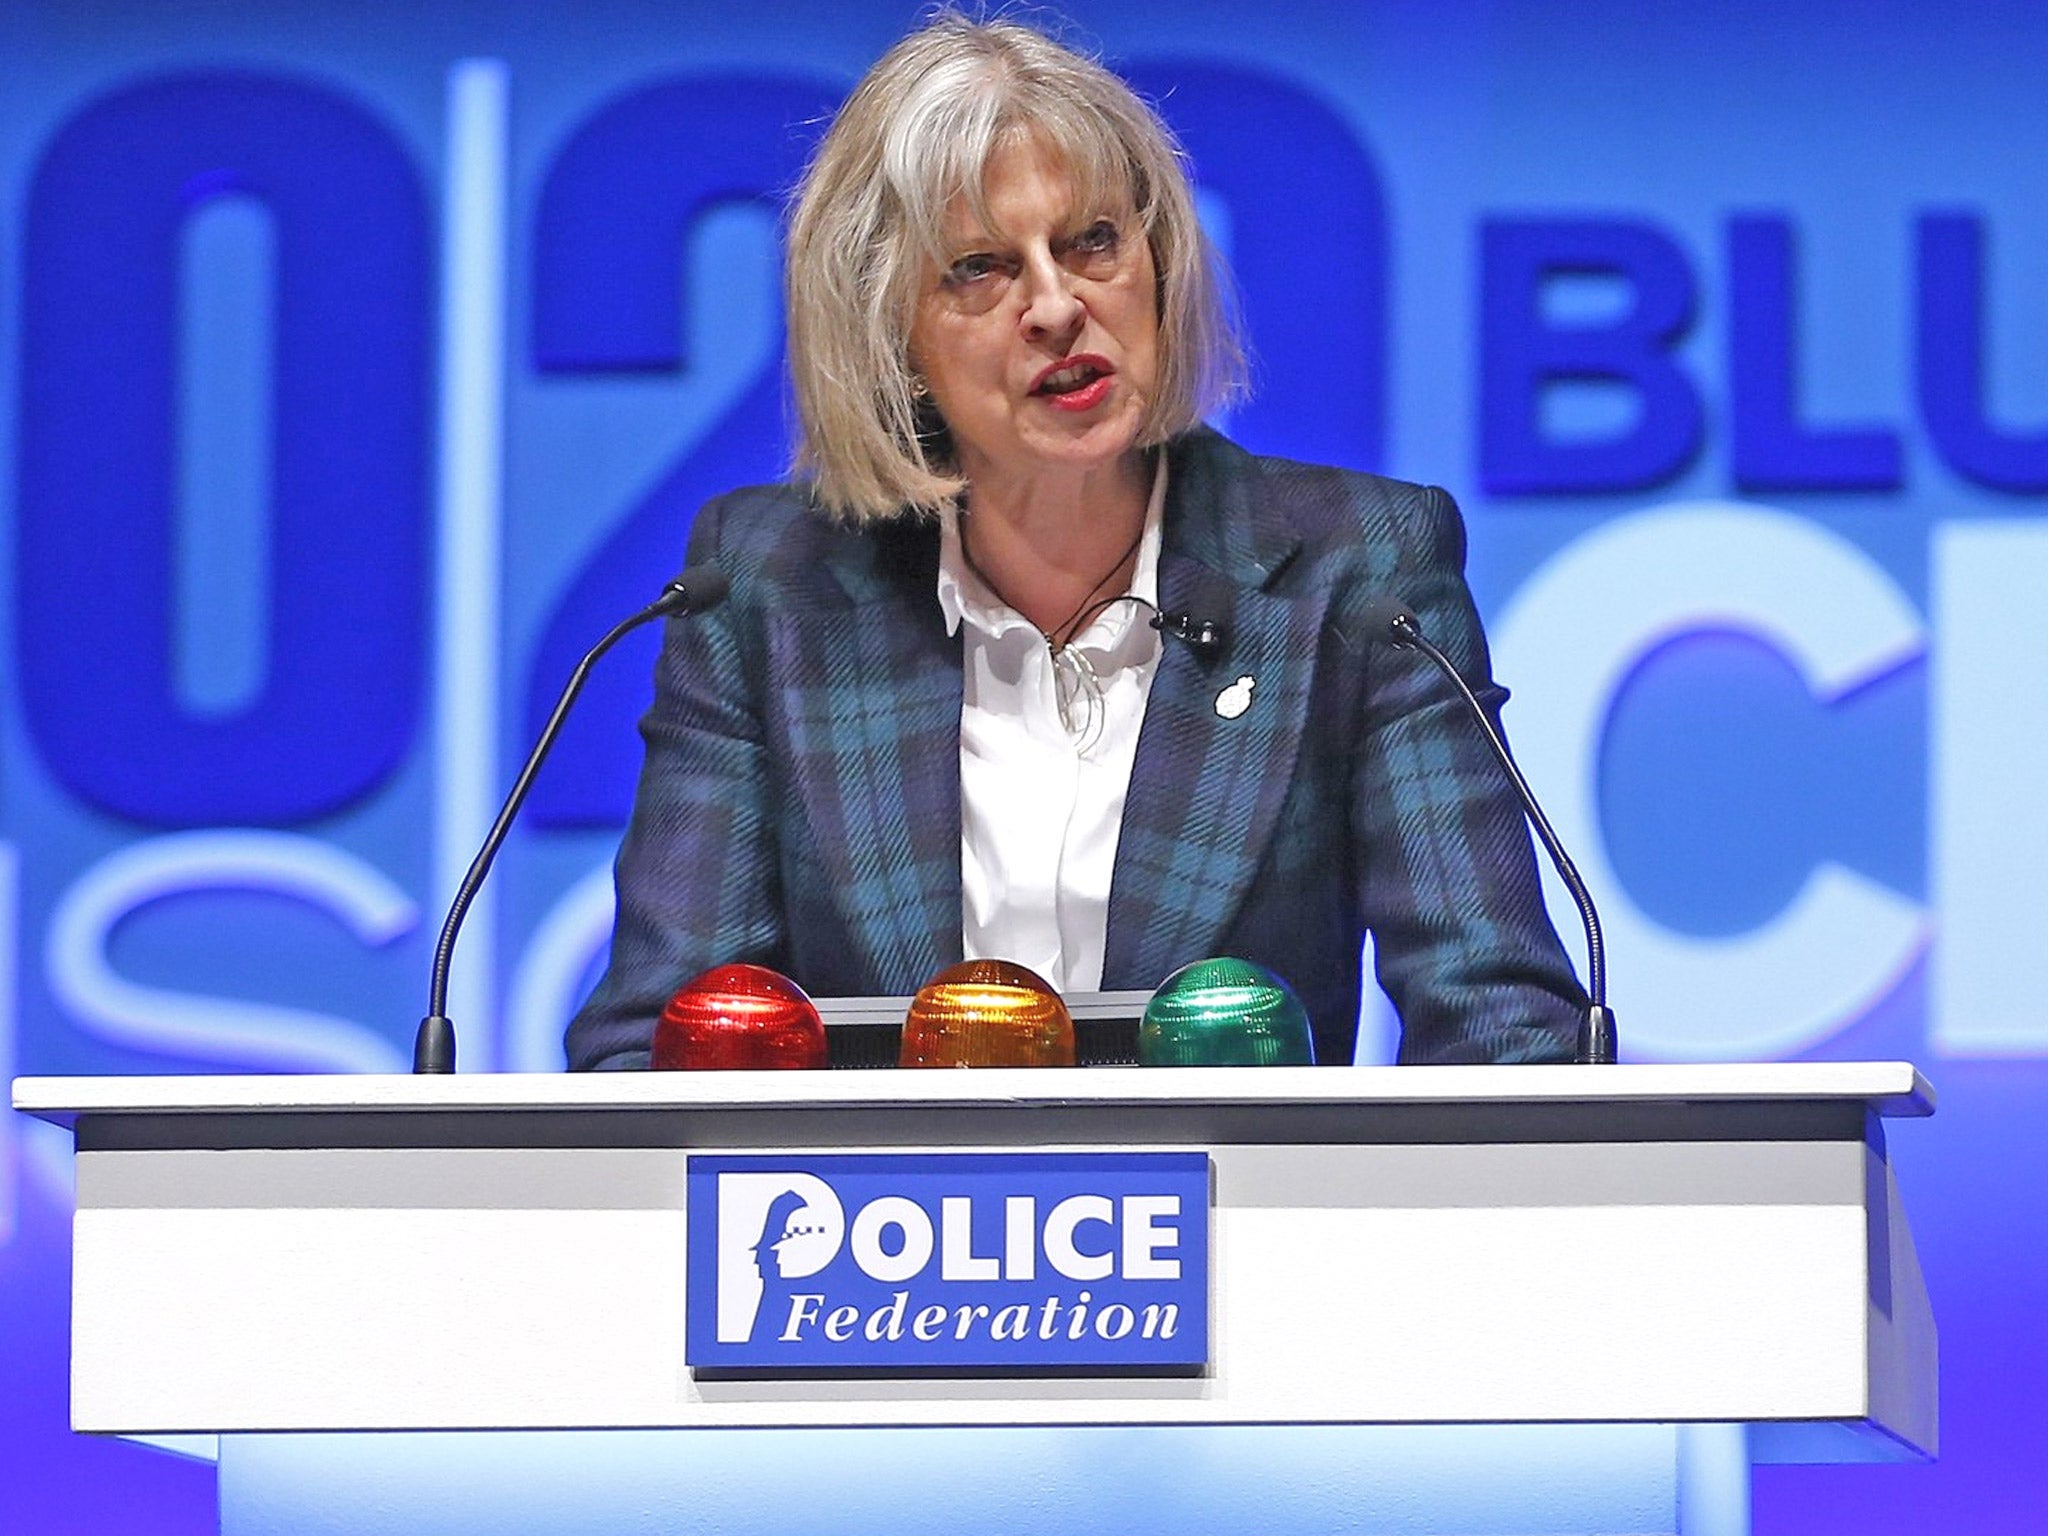 Home Secretary Theresa May said that police officers would now have to opt in to the Federation